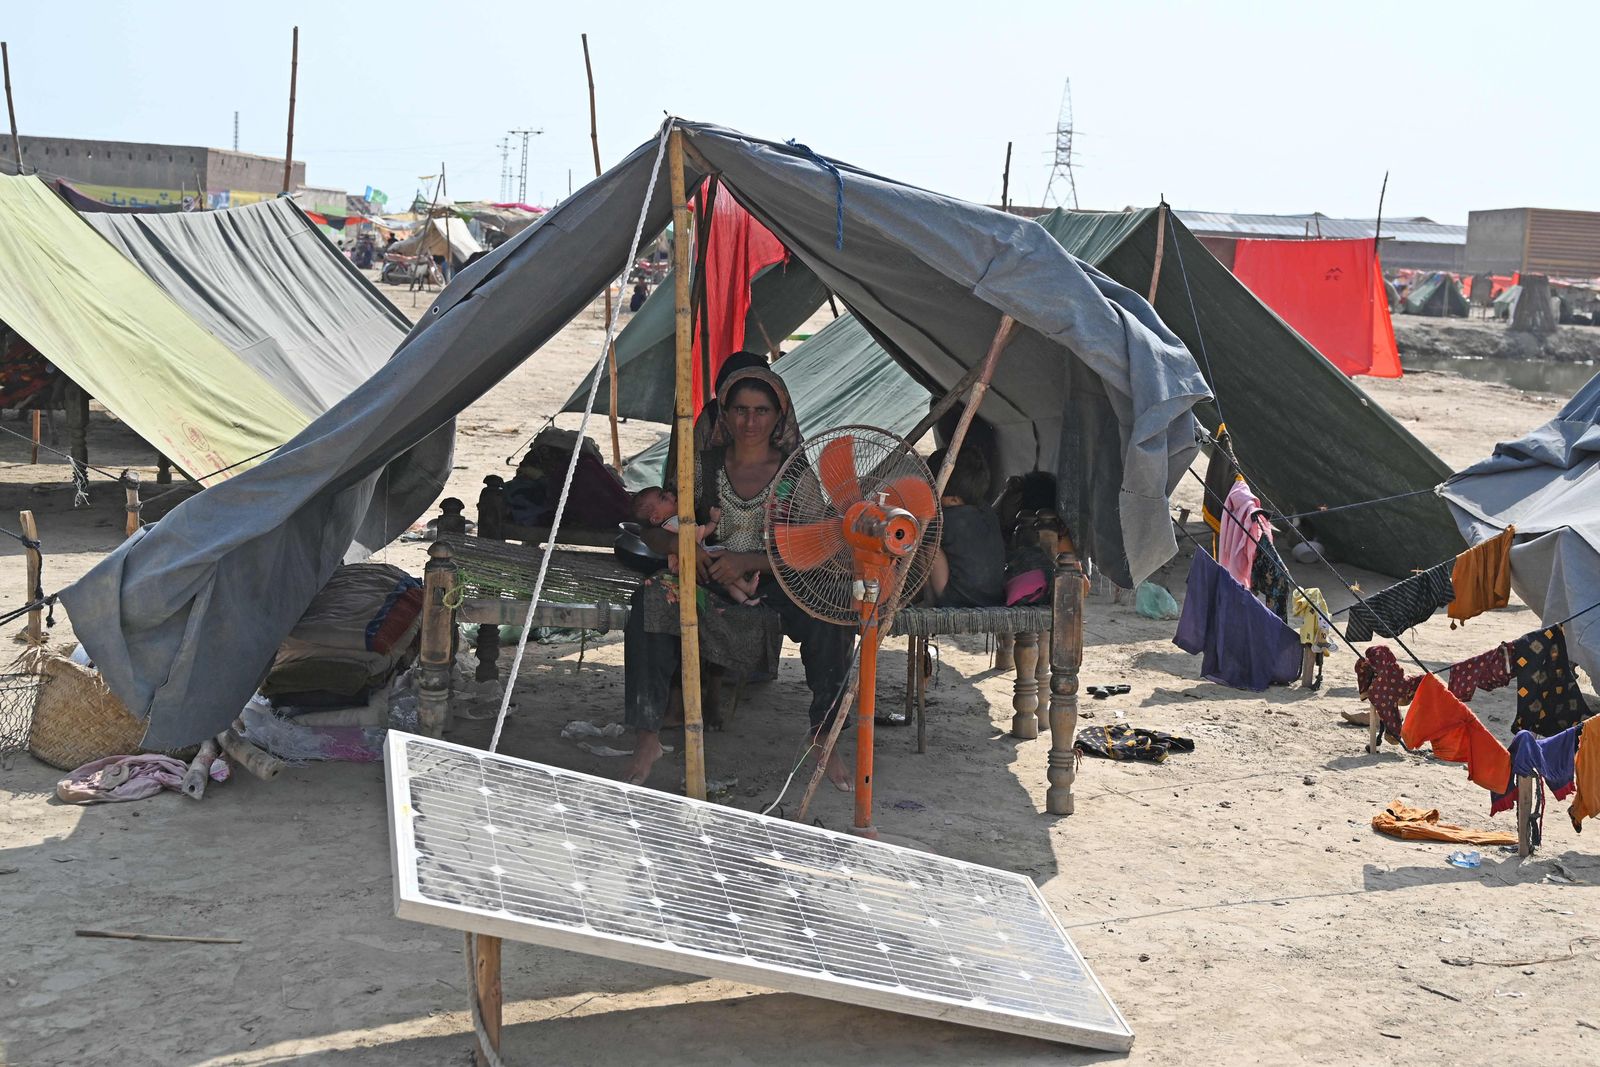 An internally displaced woman sits with her children in a tent at a makeshift camp in Mehar area after heavy monsoon rains in Dadu district, Sindh province on September 7, 2022. - Record monsoon rains have caused devastating floods across Pakistan since June, killing more than 1,200 people and leaving almost a third of the country under water, affecting the lives of 33 million. (Photo by Aamir QURESHI / AFP) - AFP